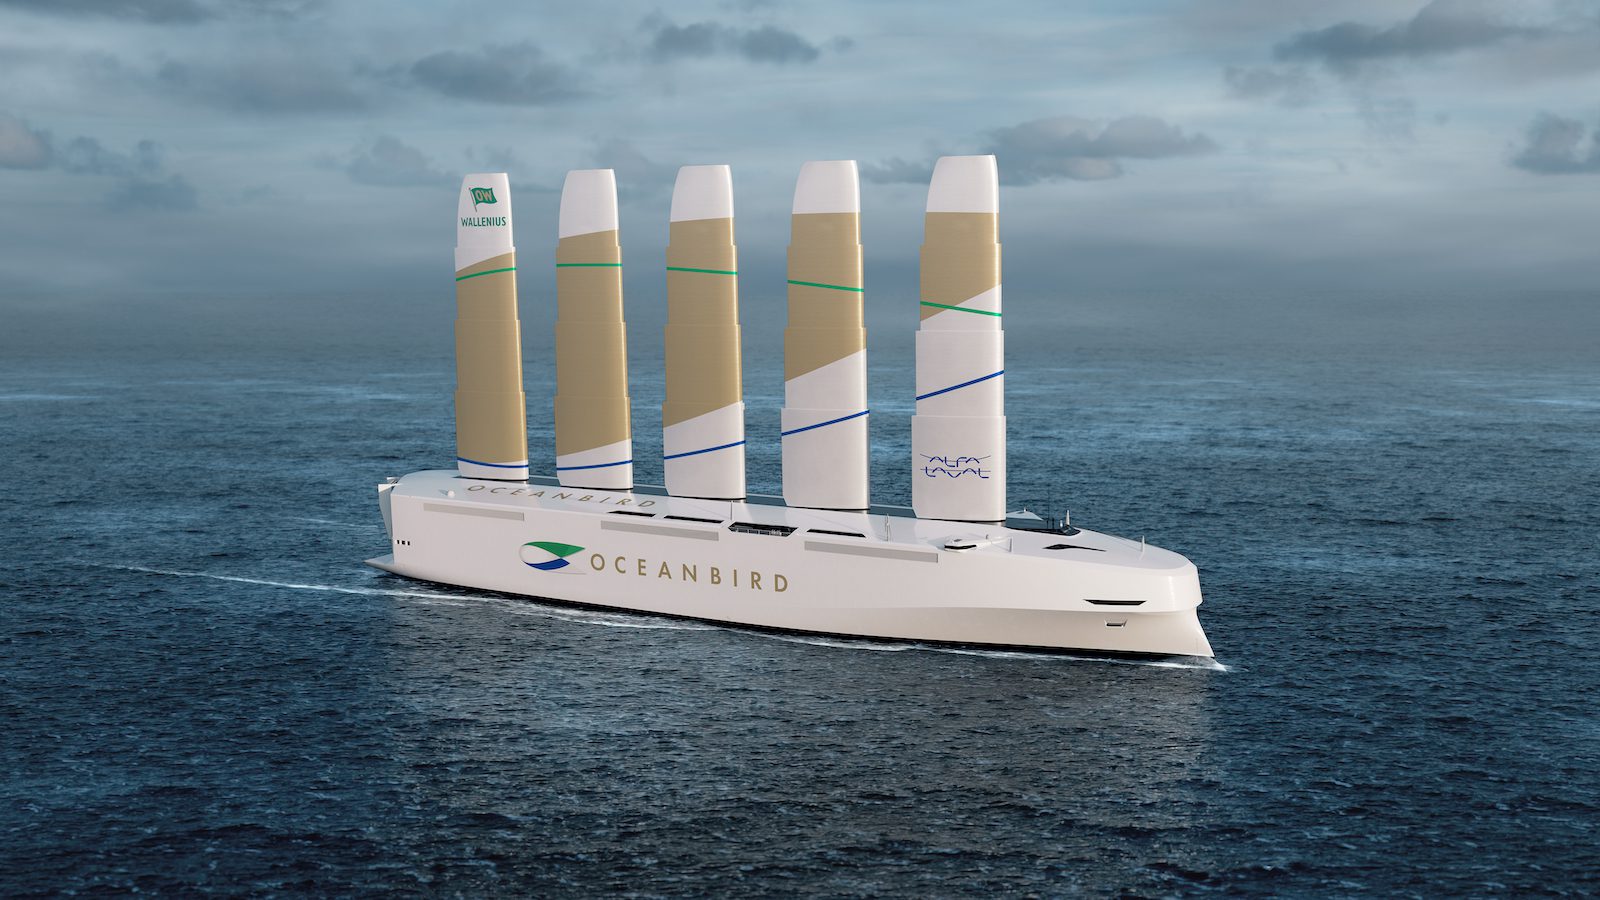 Alfa Laval and Wallenius agree on a joint venture to develop modern wind propulsion